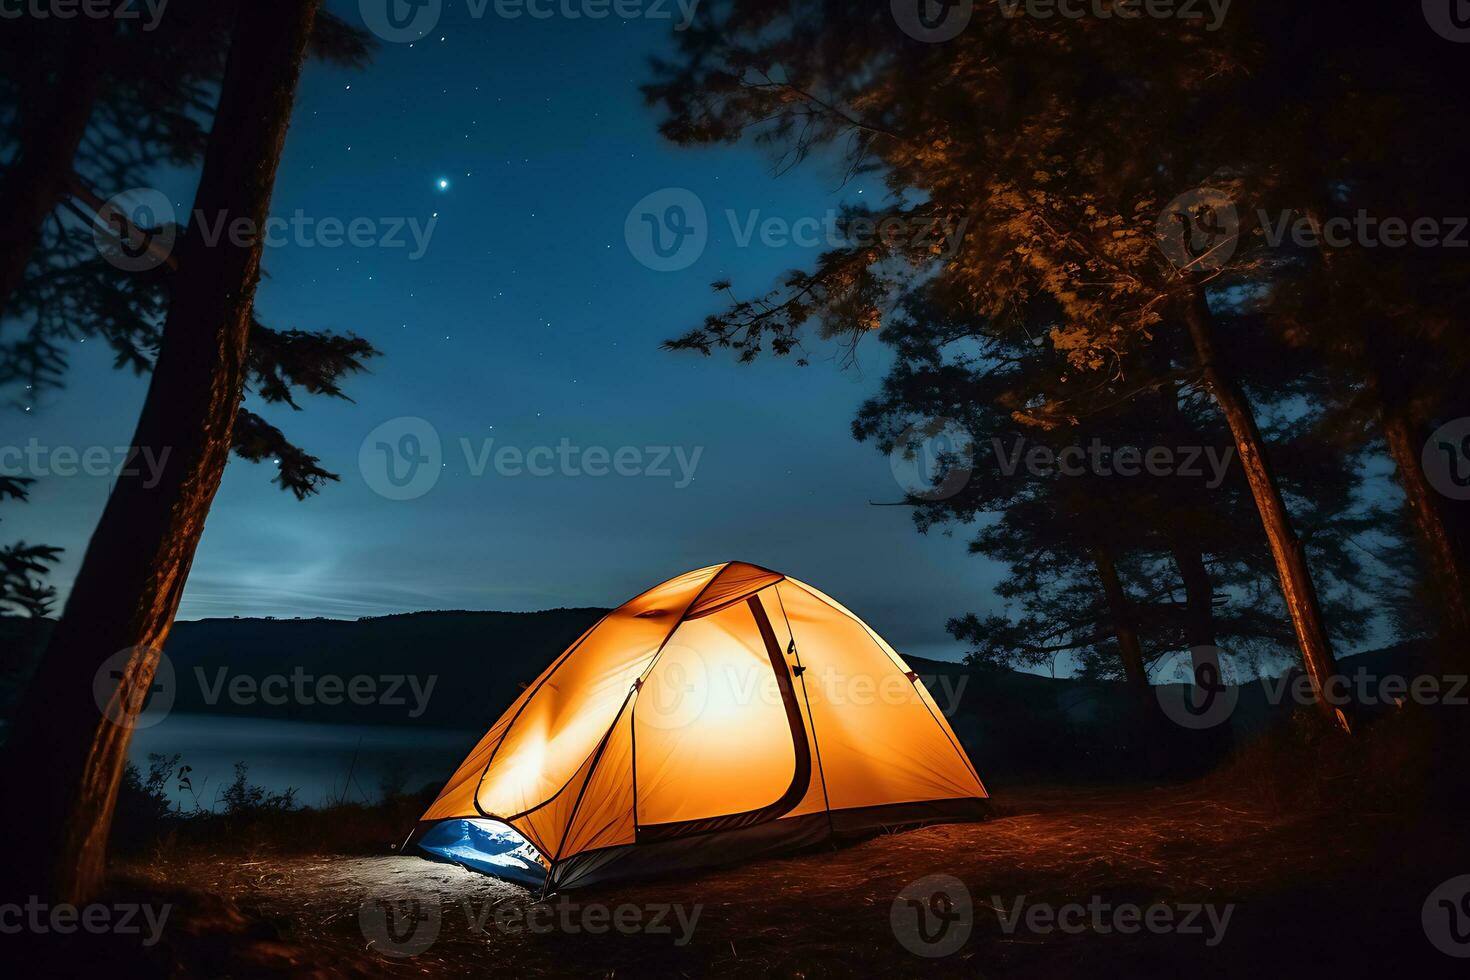 camping tent near trees during night time photo